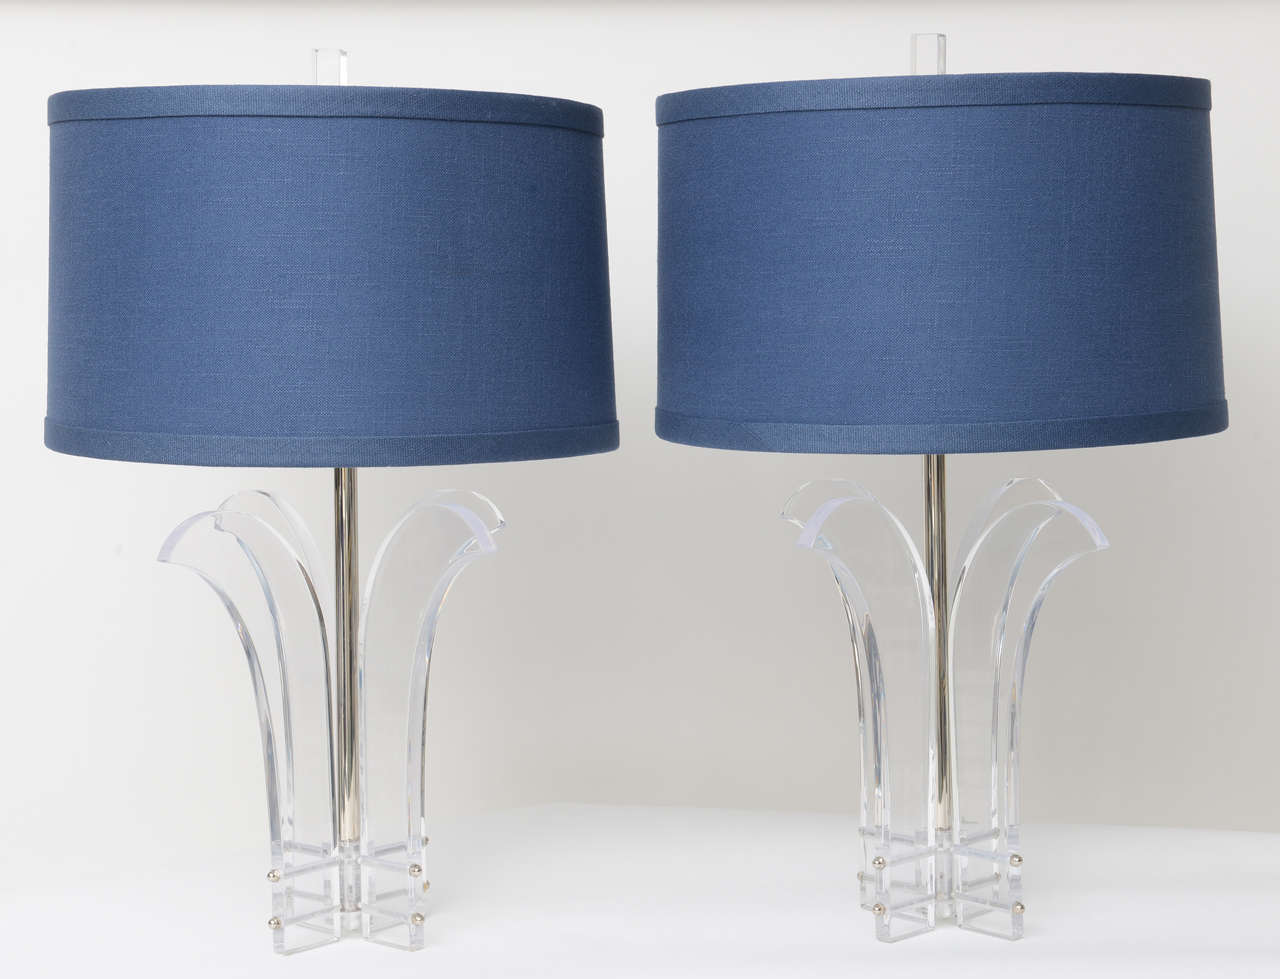 Pair of Lucite lamps featuring four plume-like arms. Newly rewired and appointed with nickel fittings including the screw covers, centre post, and sockets.